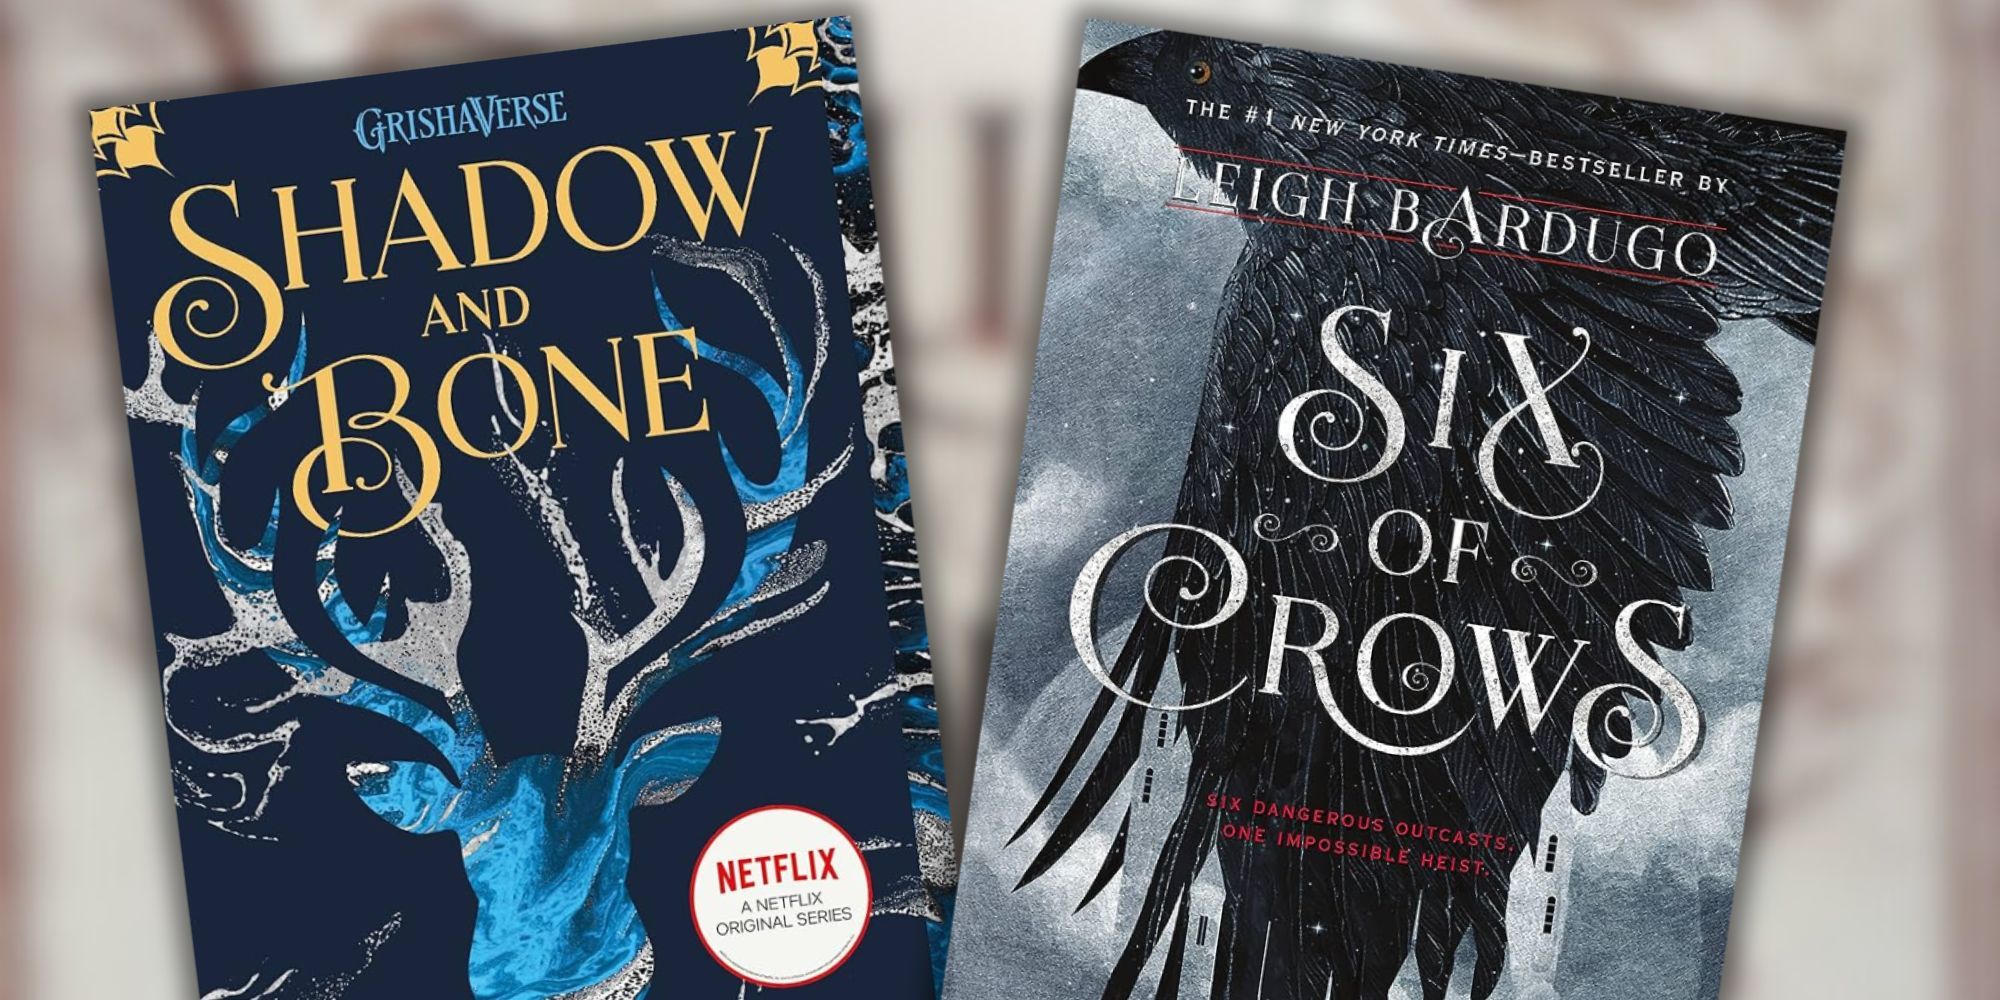 Shadow and Bone and Six of Crows book covers